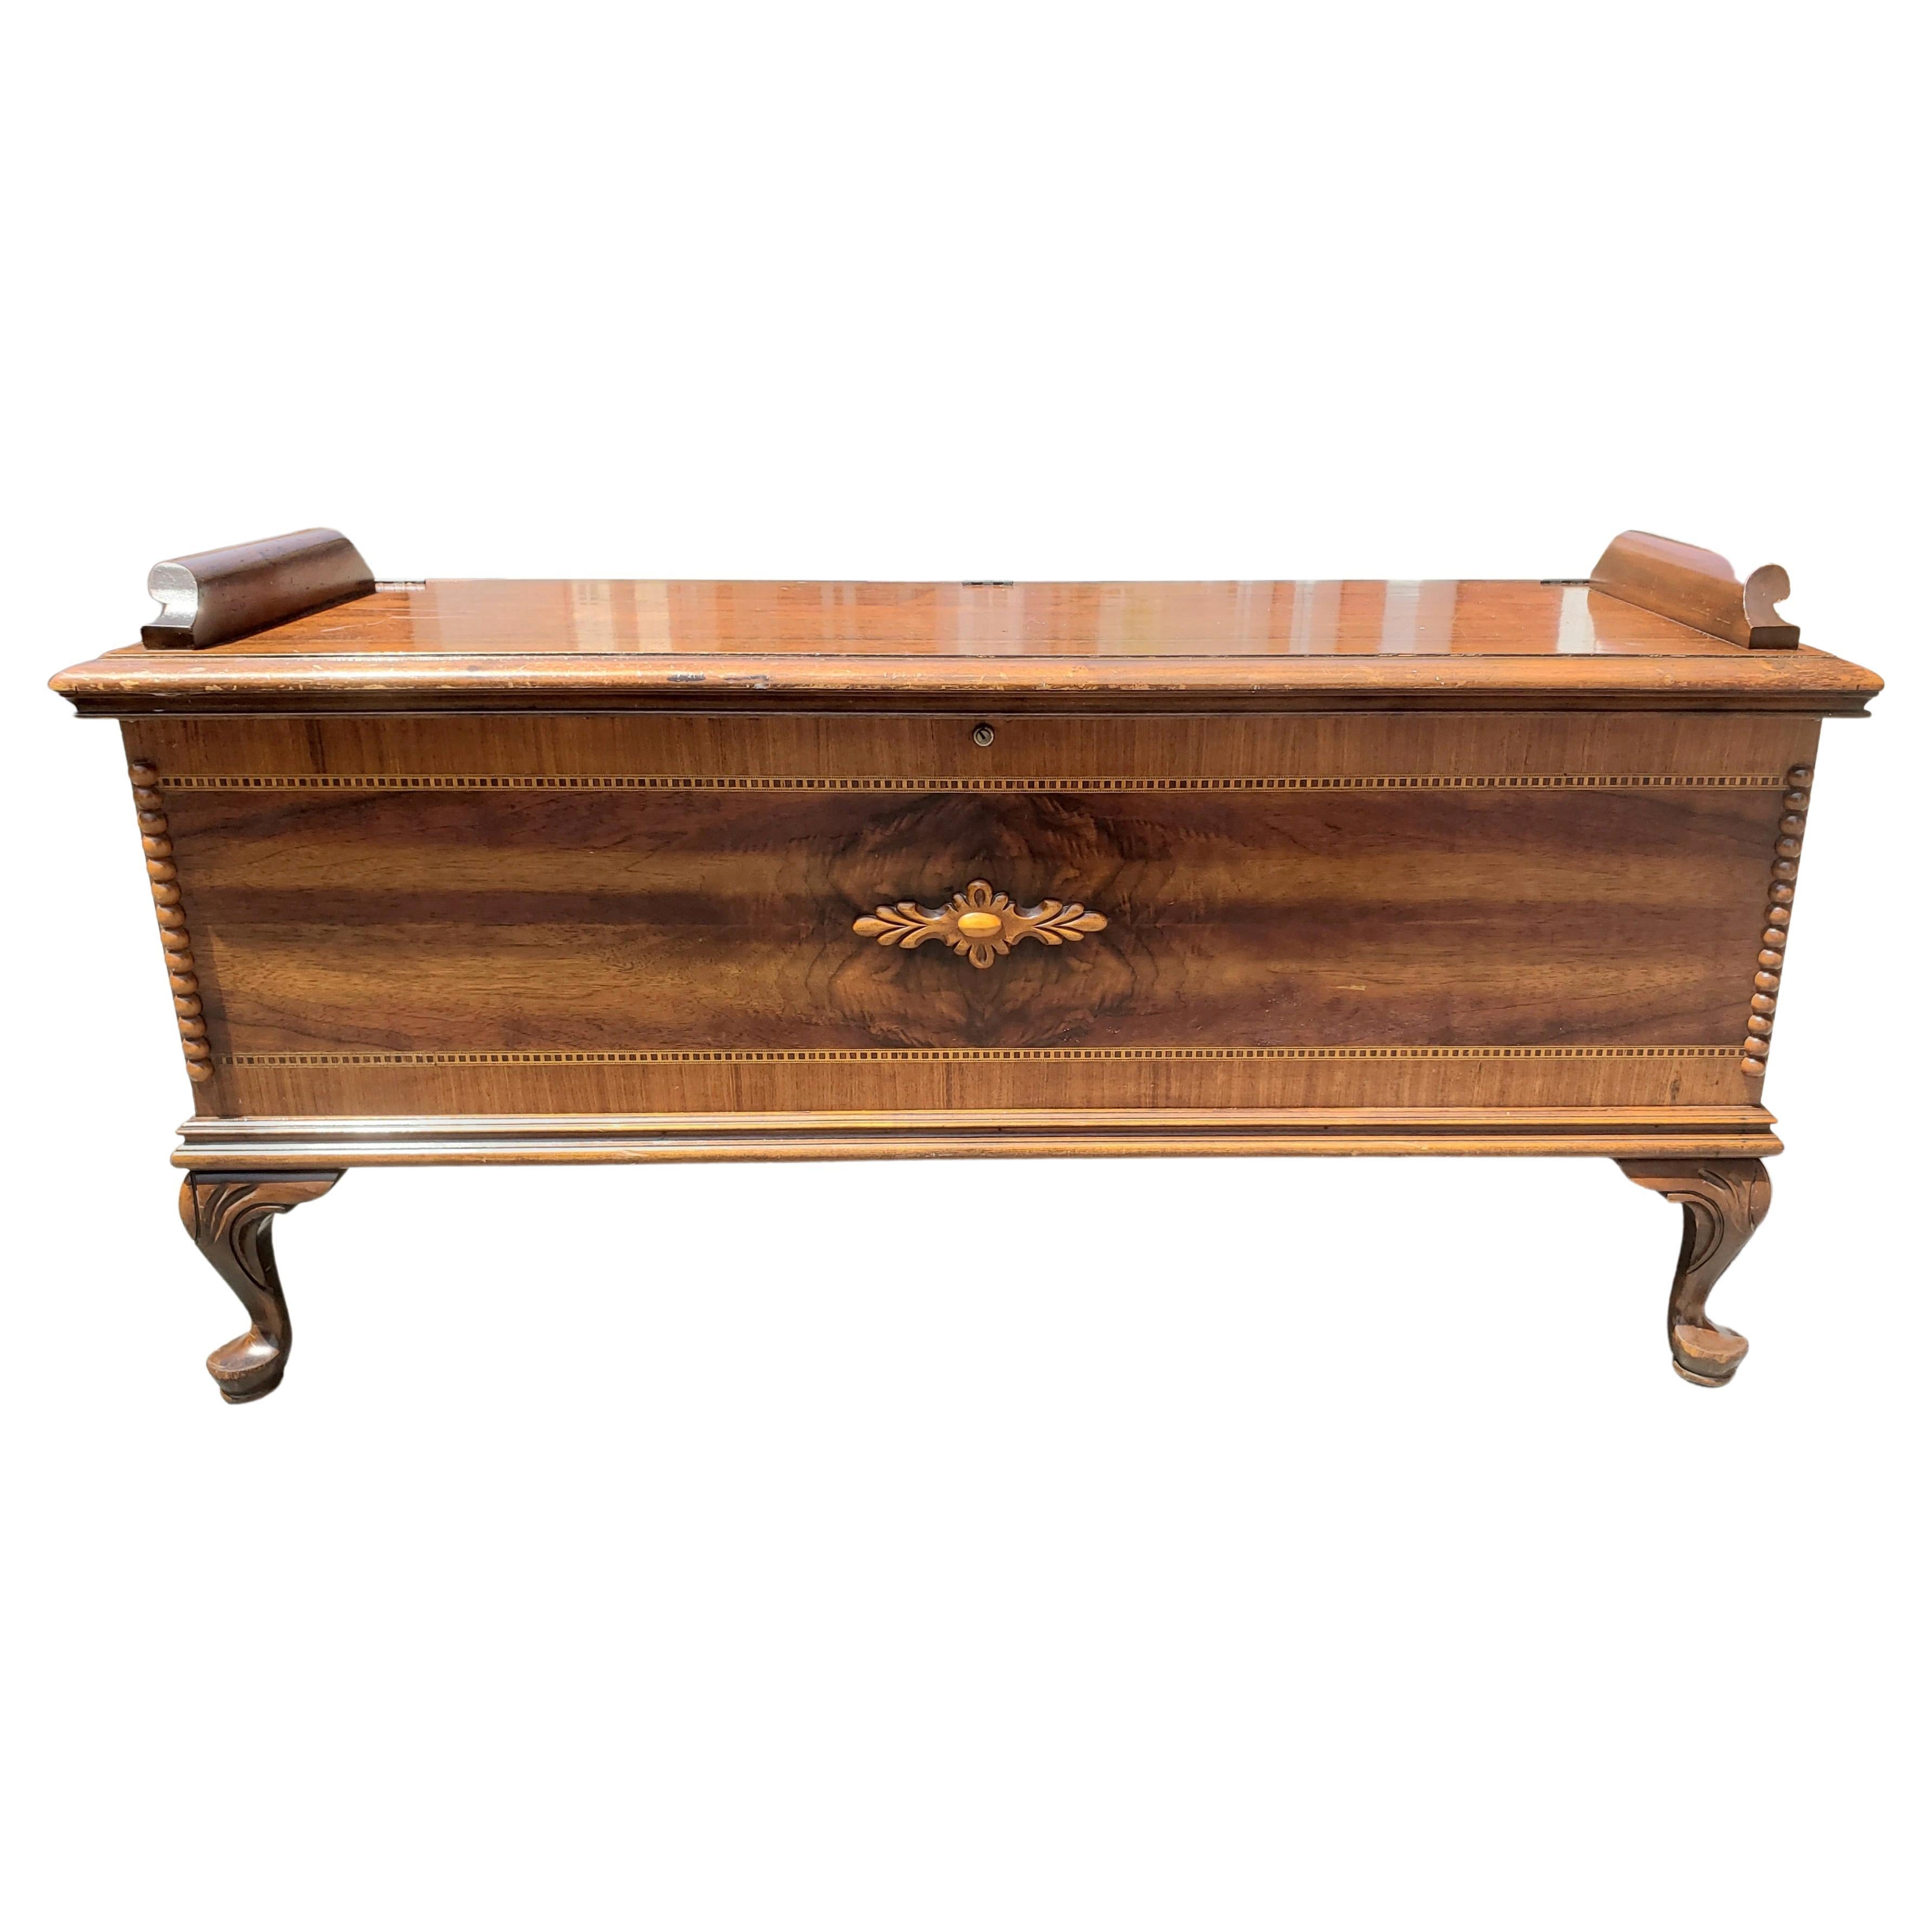 Lane Flame Mahogany with Inlays Blanket Chest with Cedar Lining